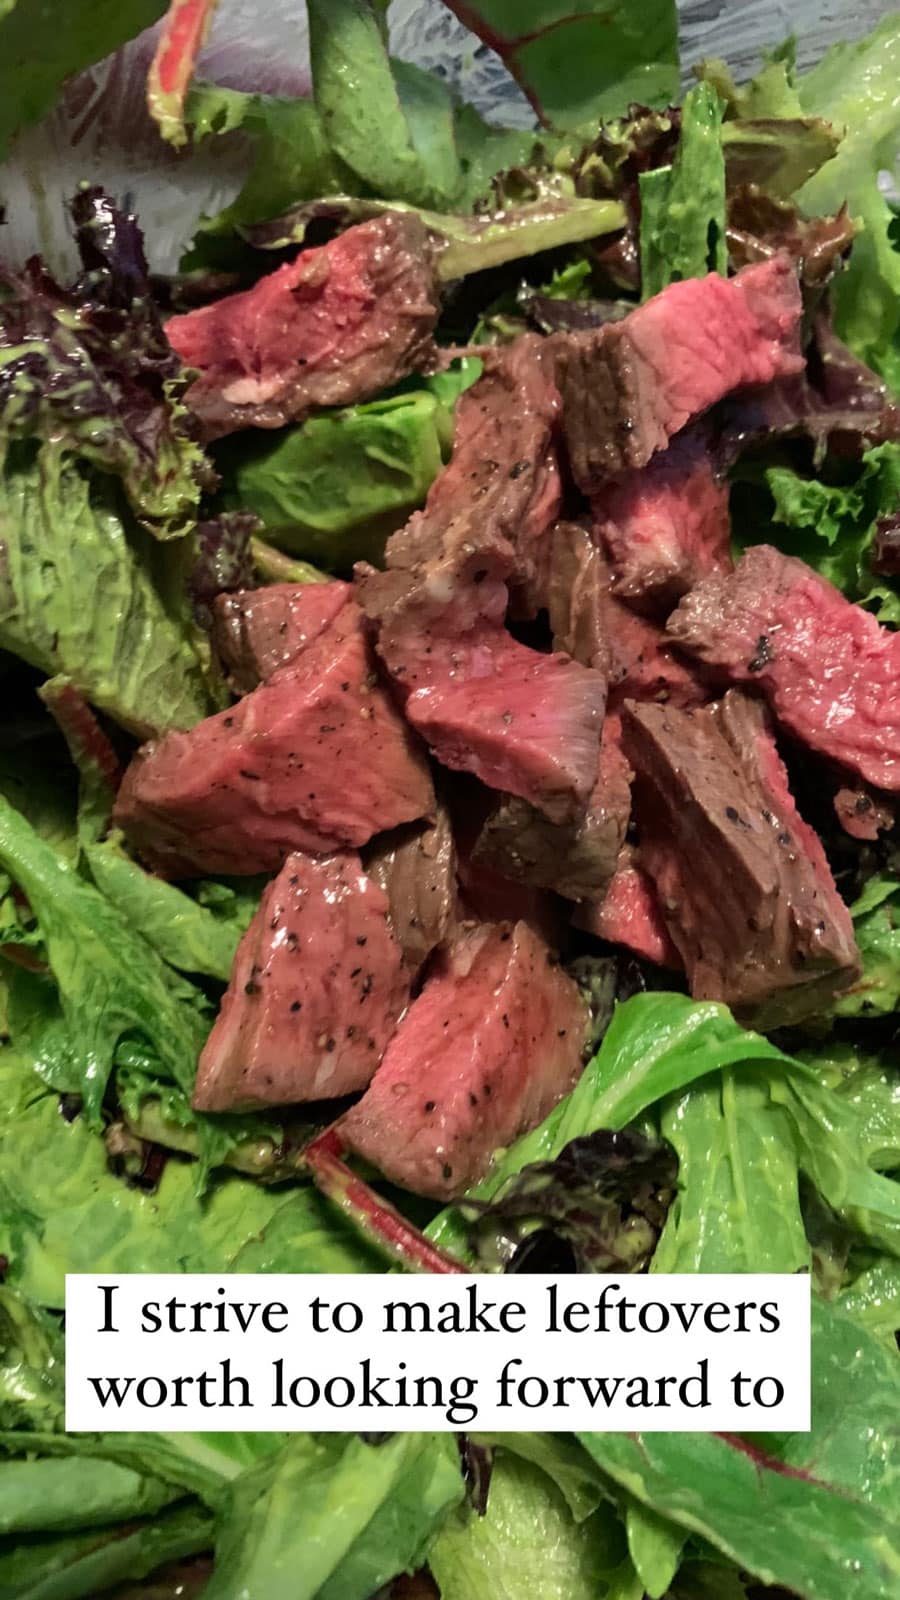 Serving suggestions: chunks of leftover London Broil on dressed mixed salad greens